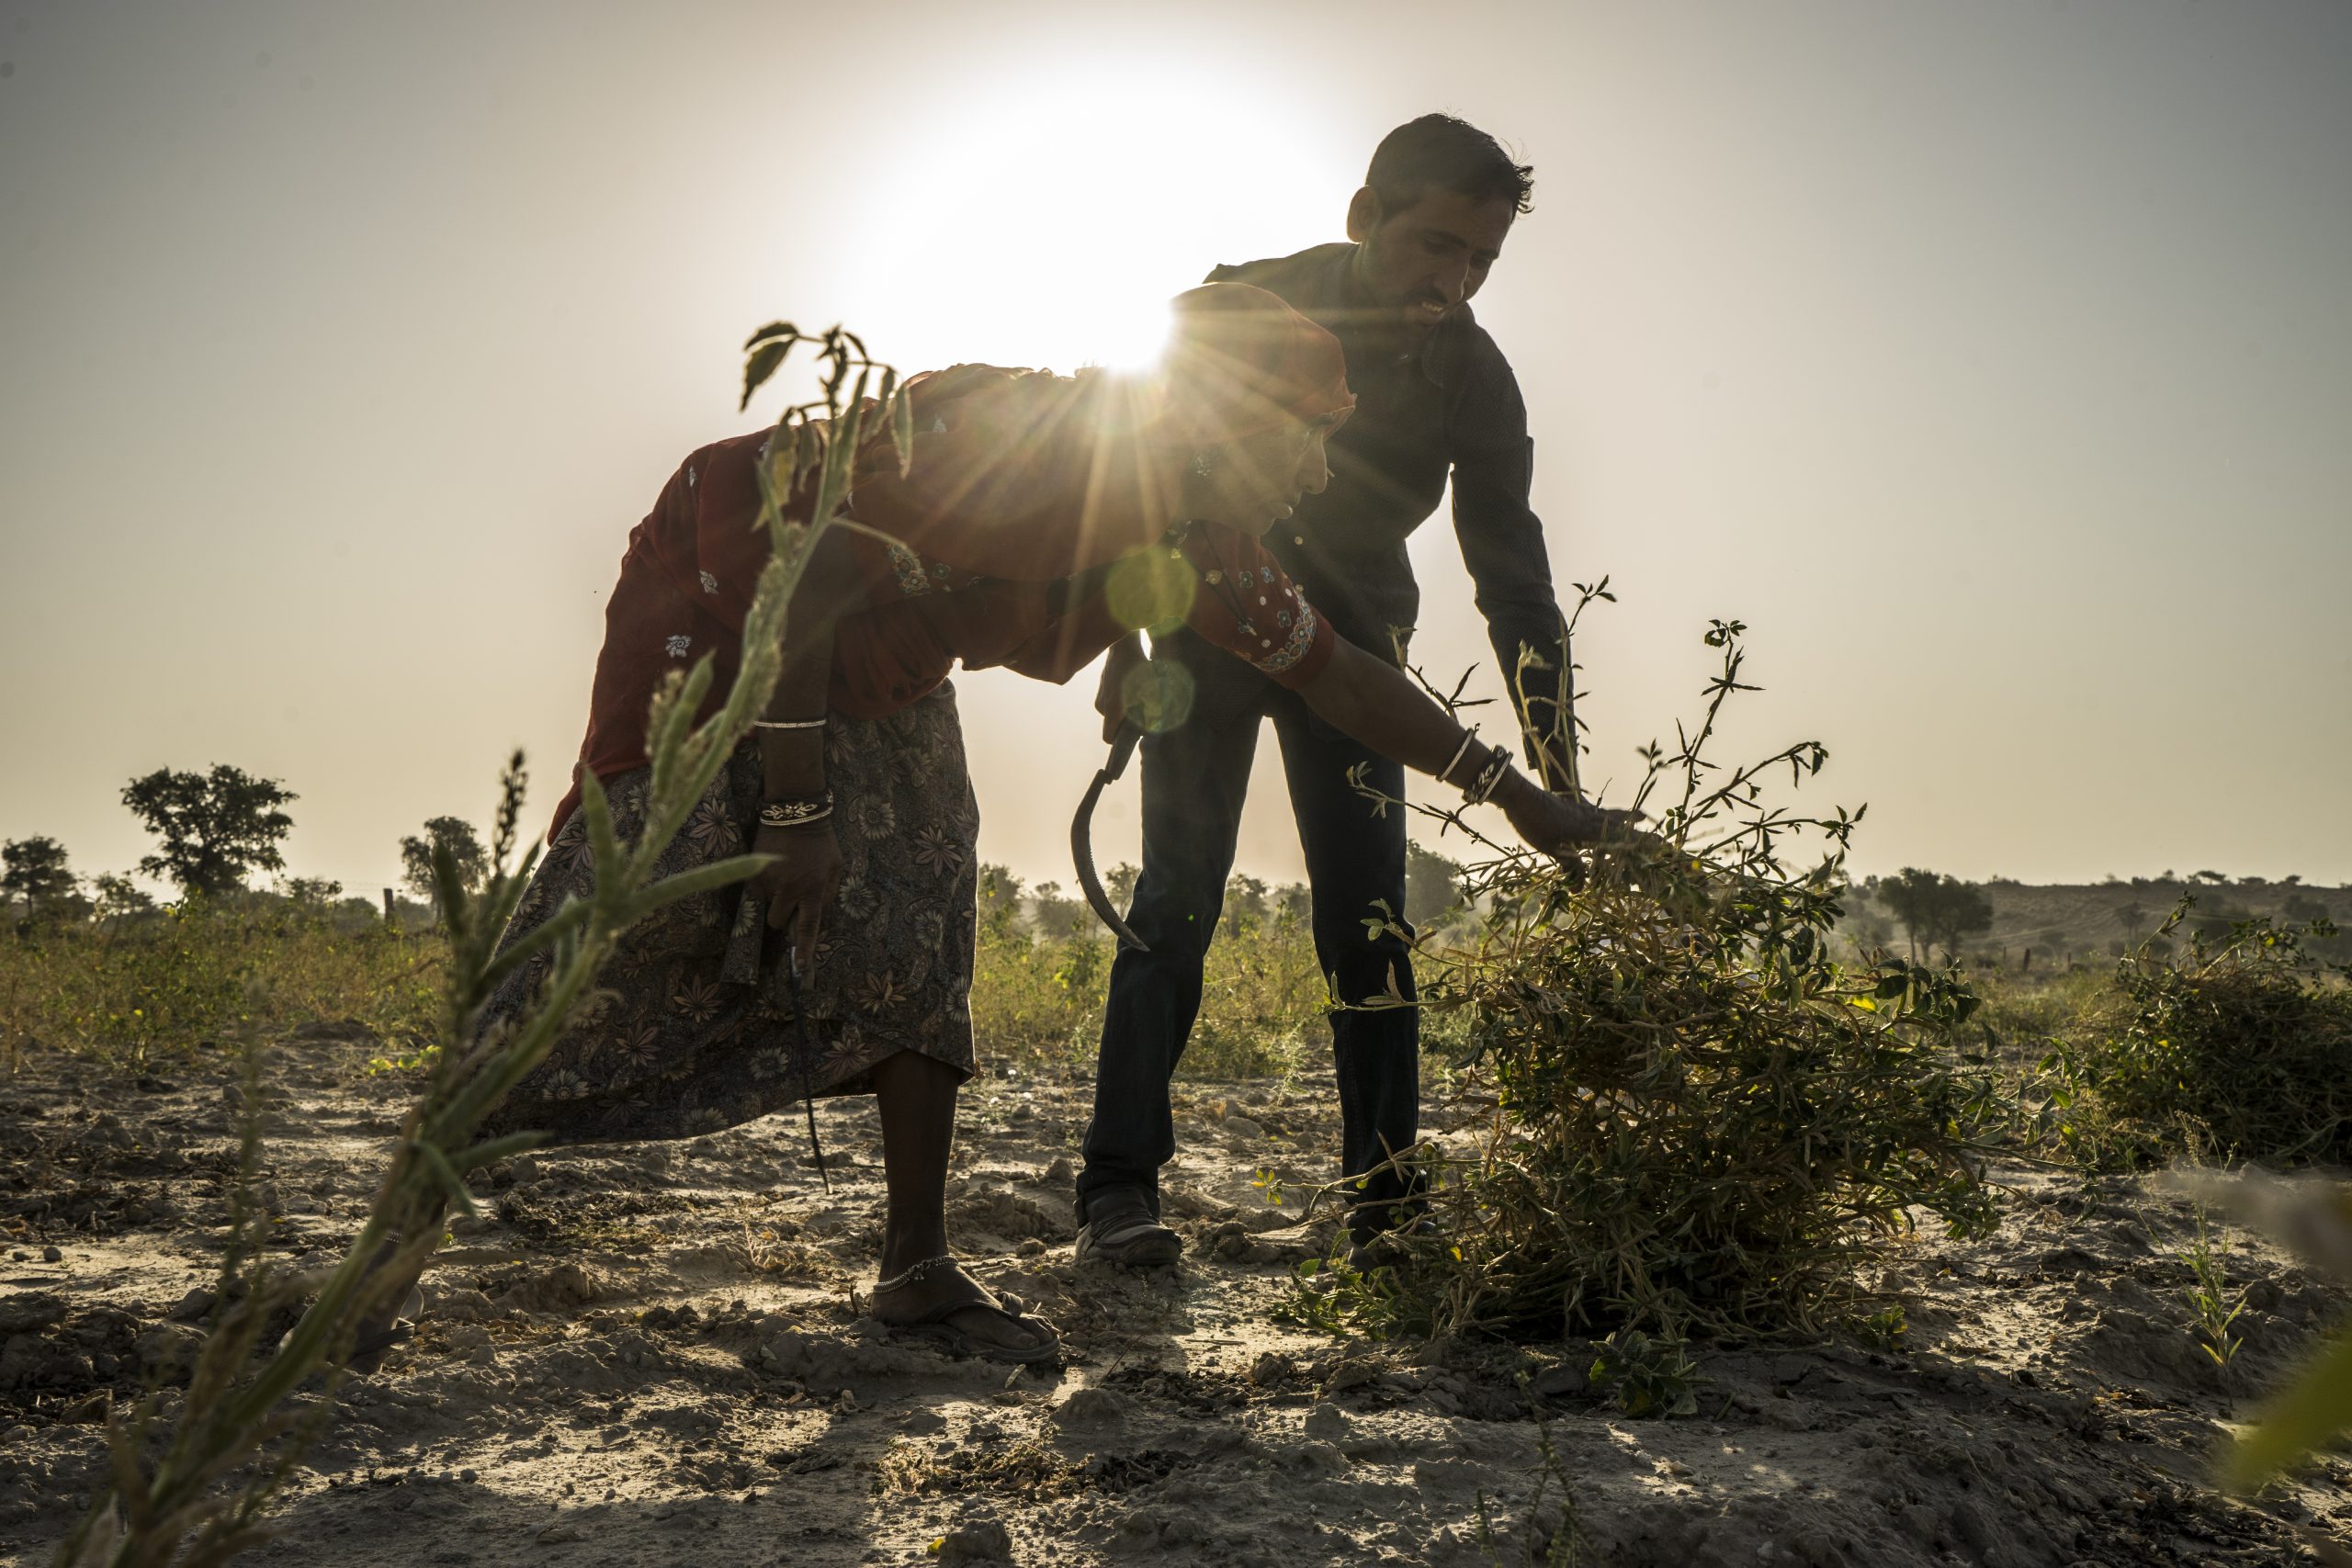 a woman and man farmer in india tend to their guar crops in the sunset